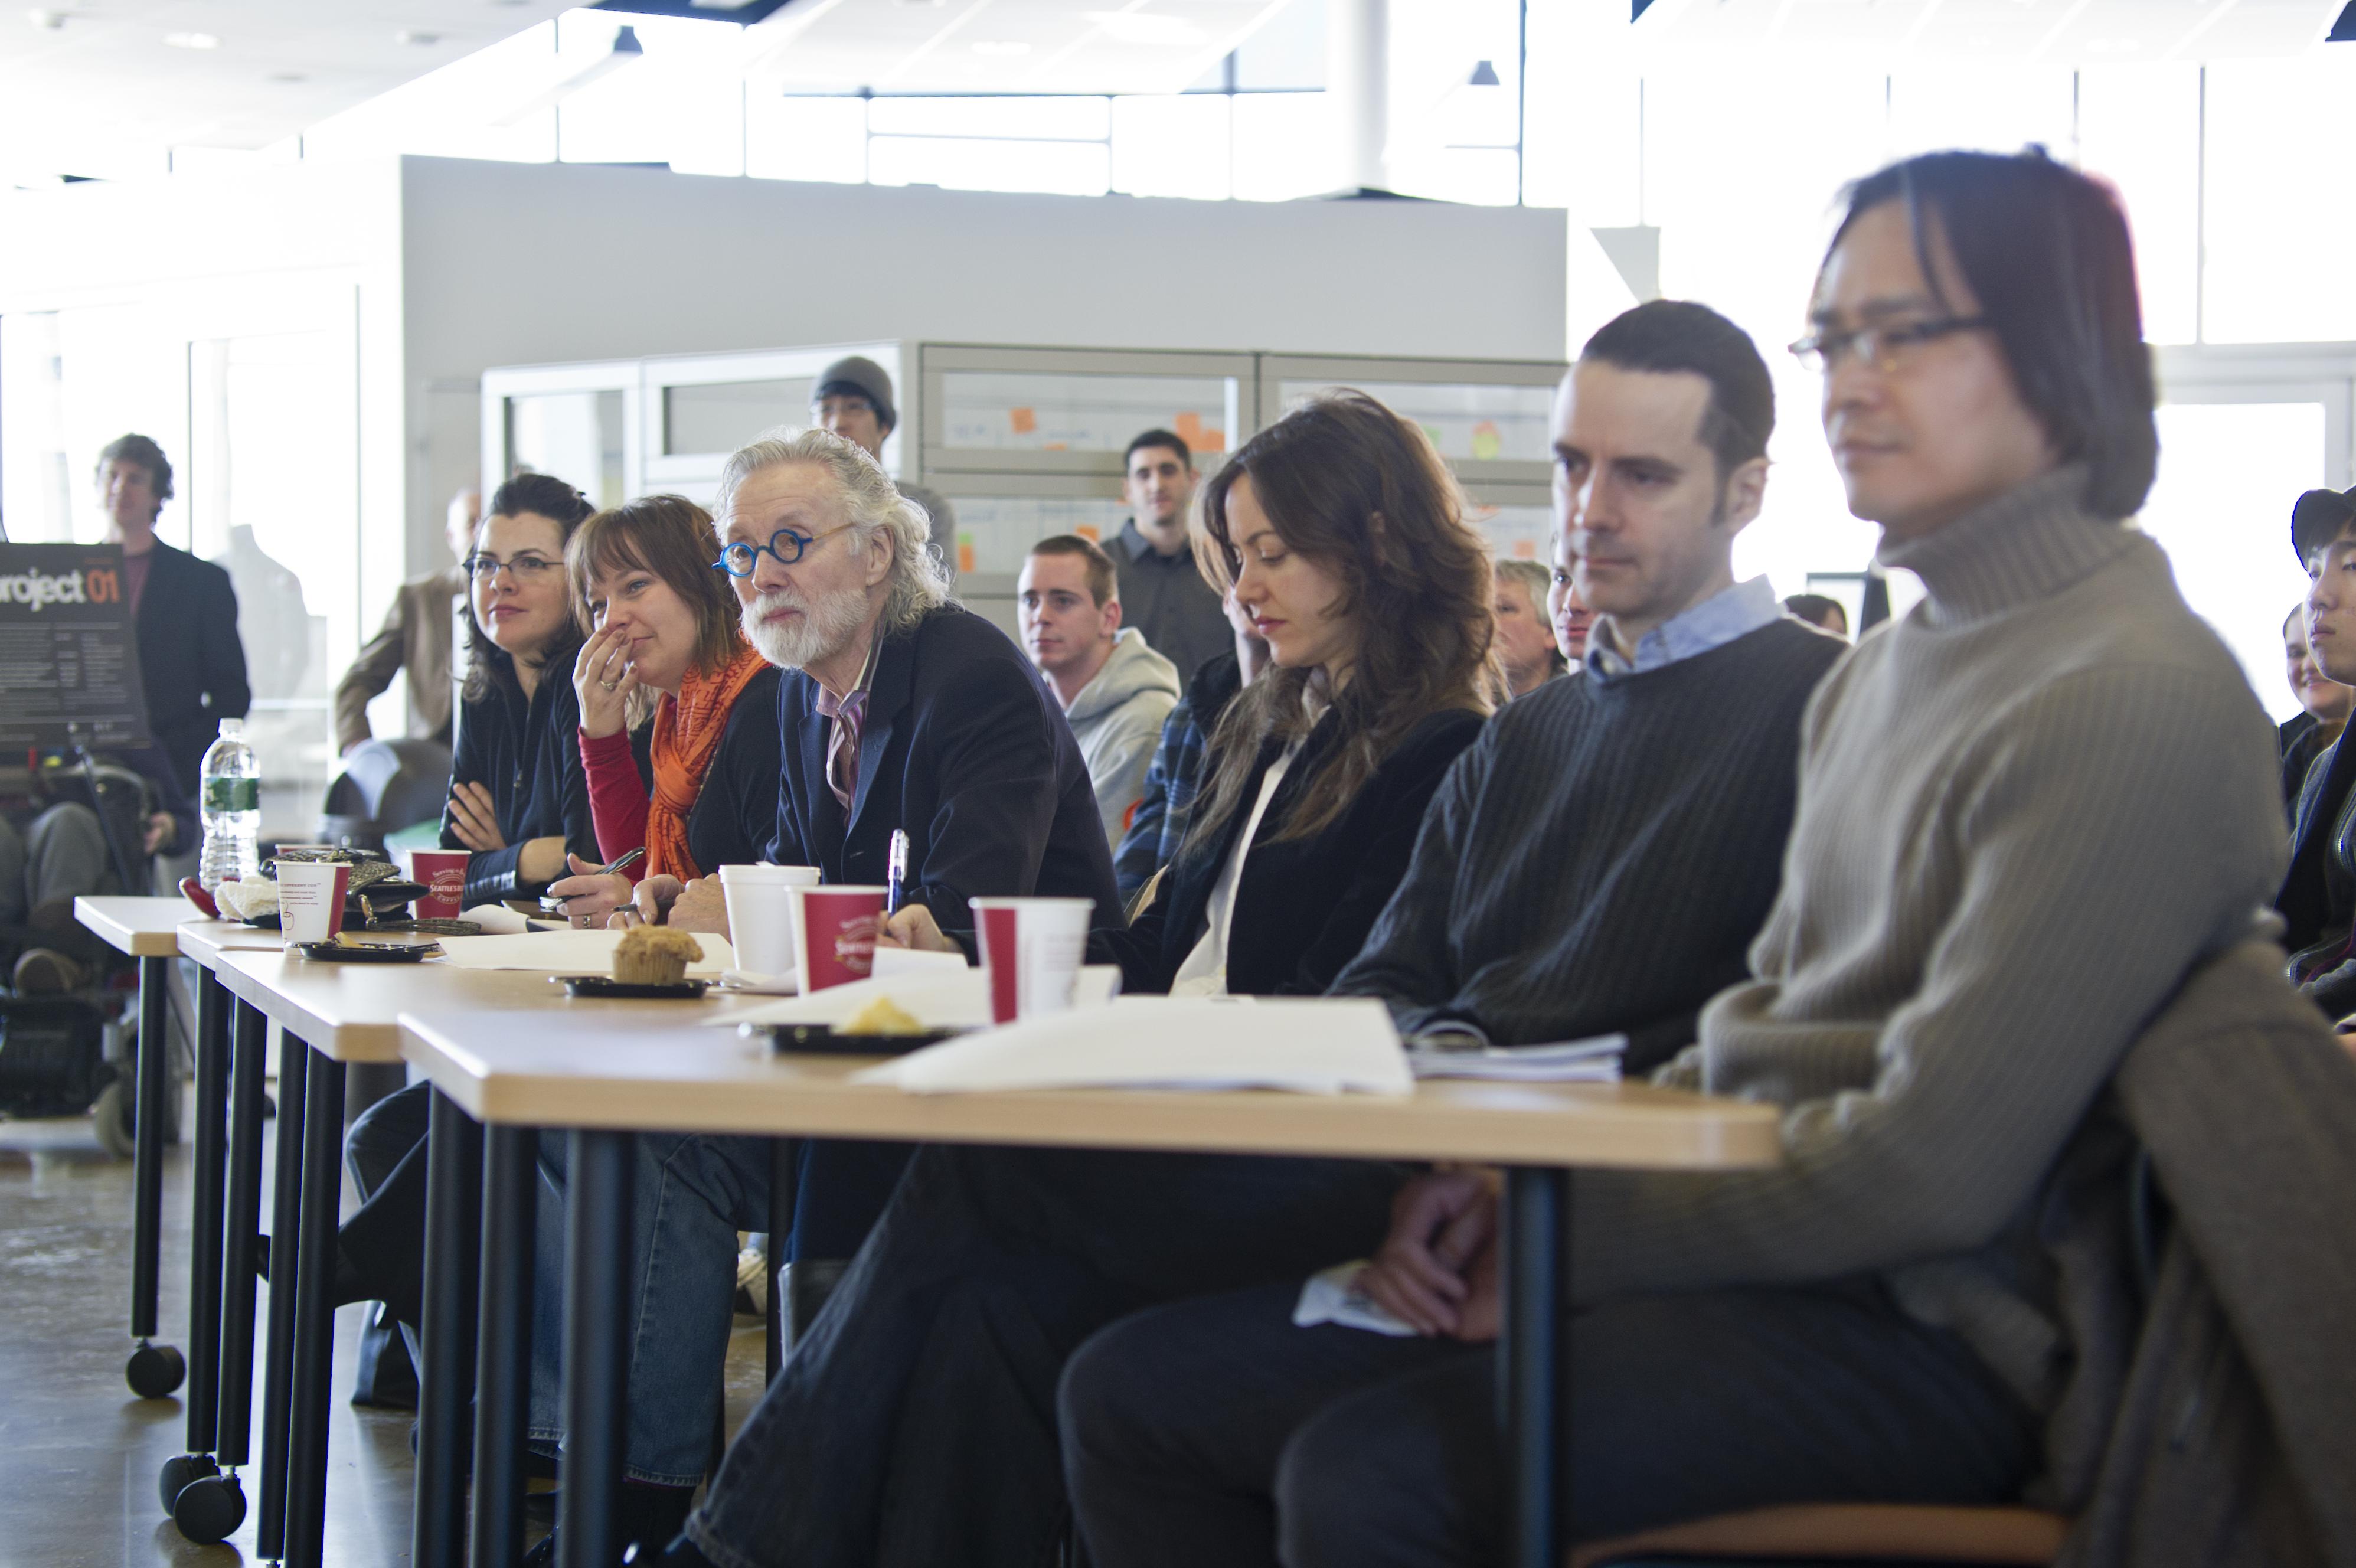 A group of people sit together at a table, judging seat designs.